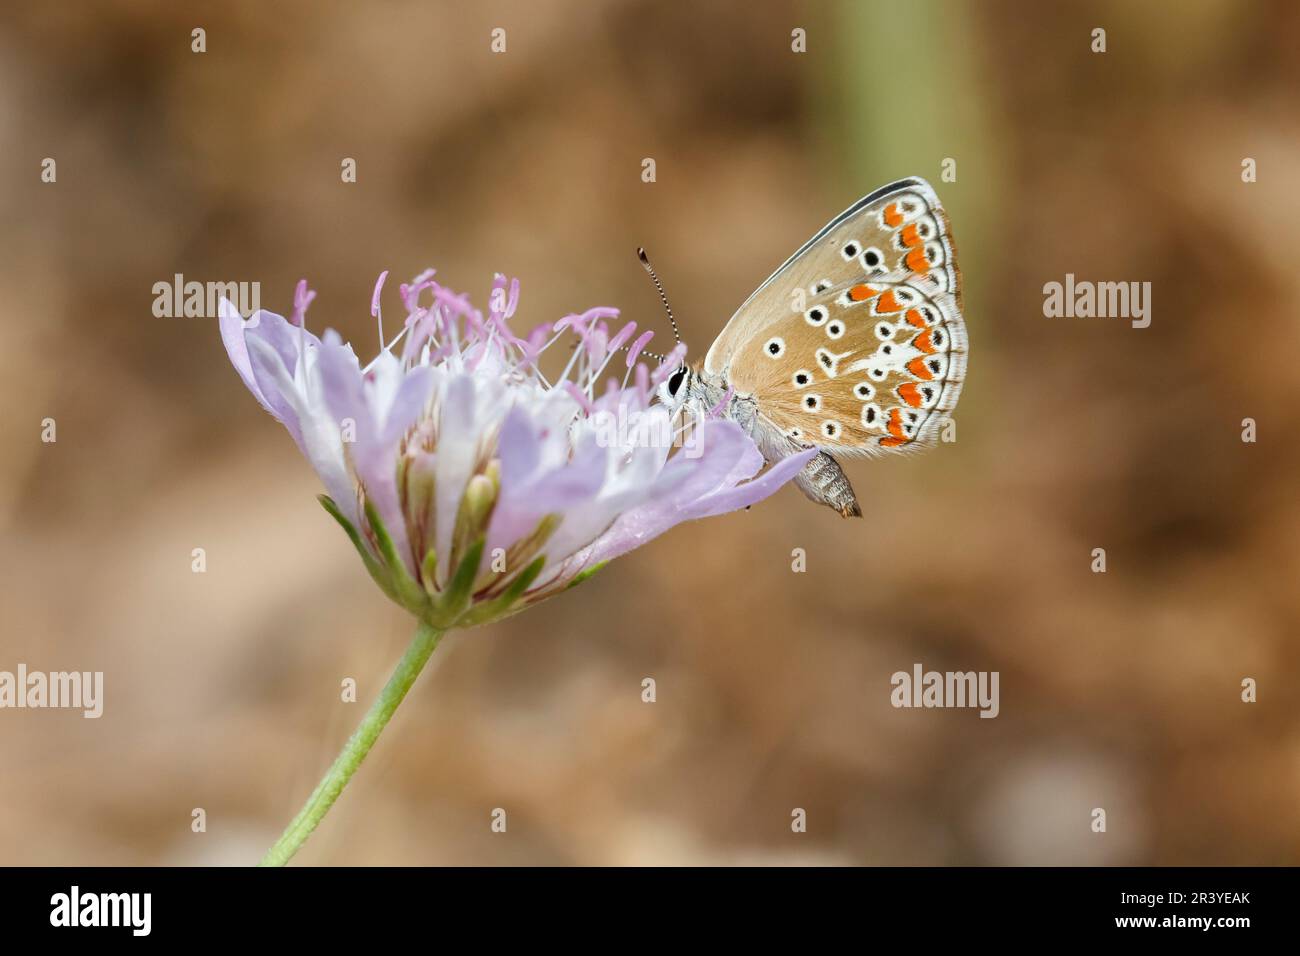 Aricia agestis, syn. Polyommatus agestis, known as the Brown argus butterfly Stock Photo